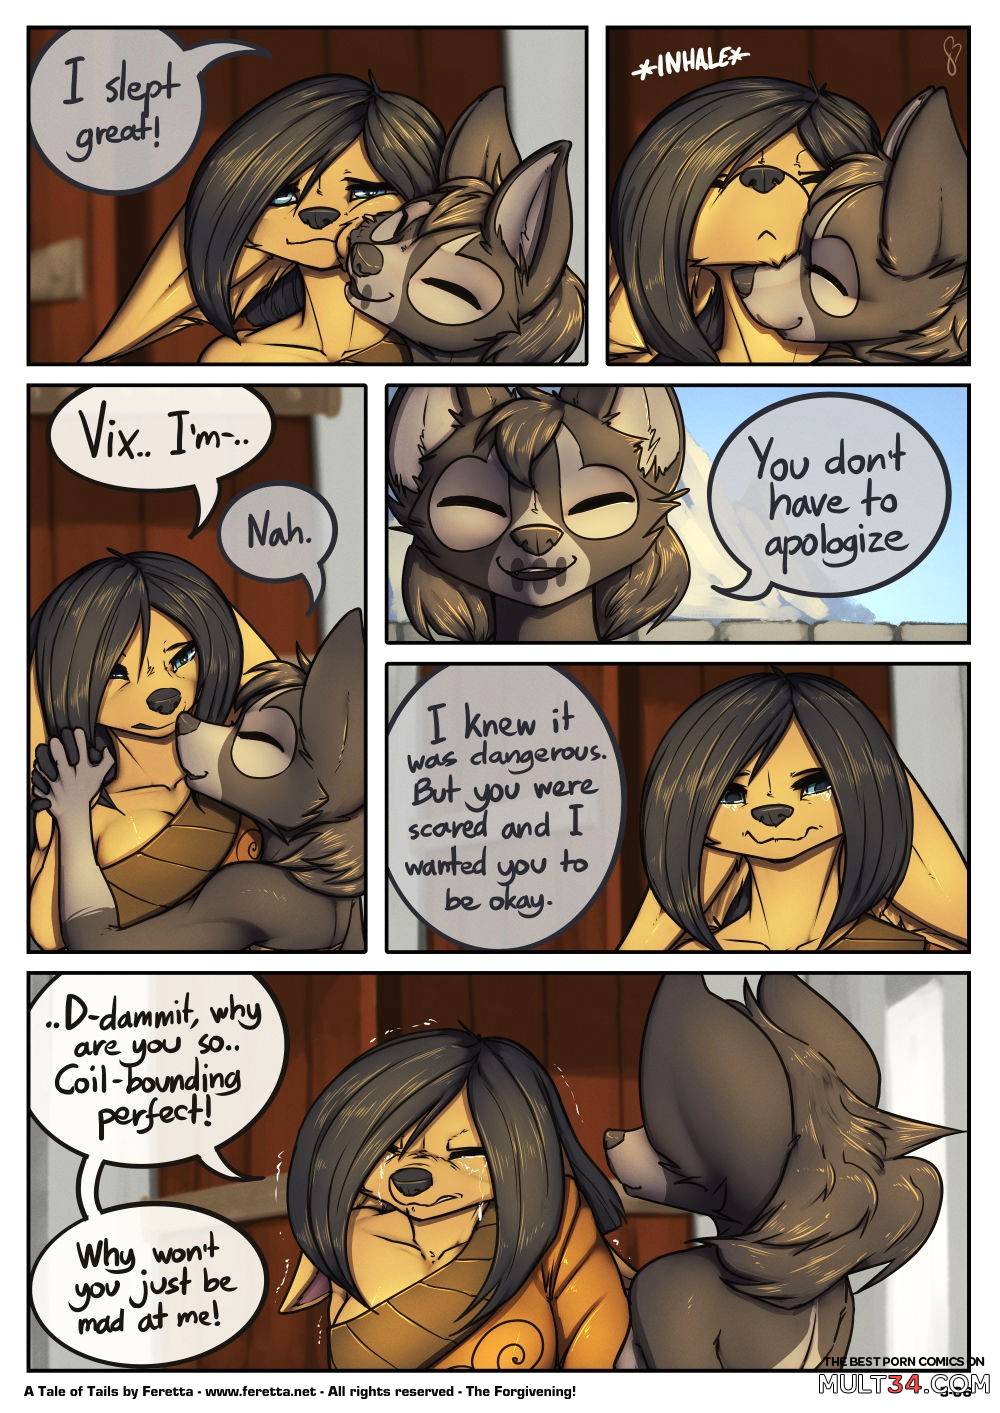 A Tale of Tails: Chapter 5 - A World of Hurt page 6